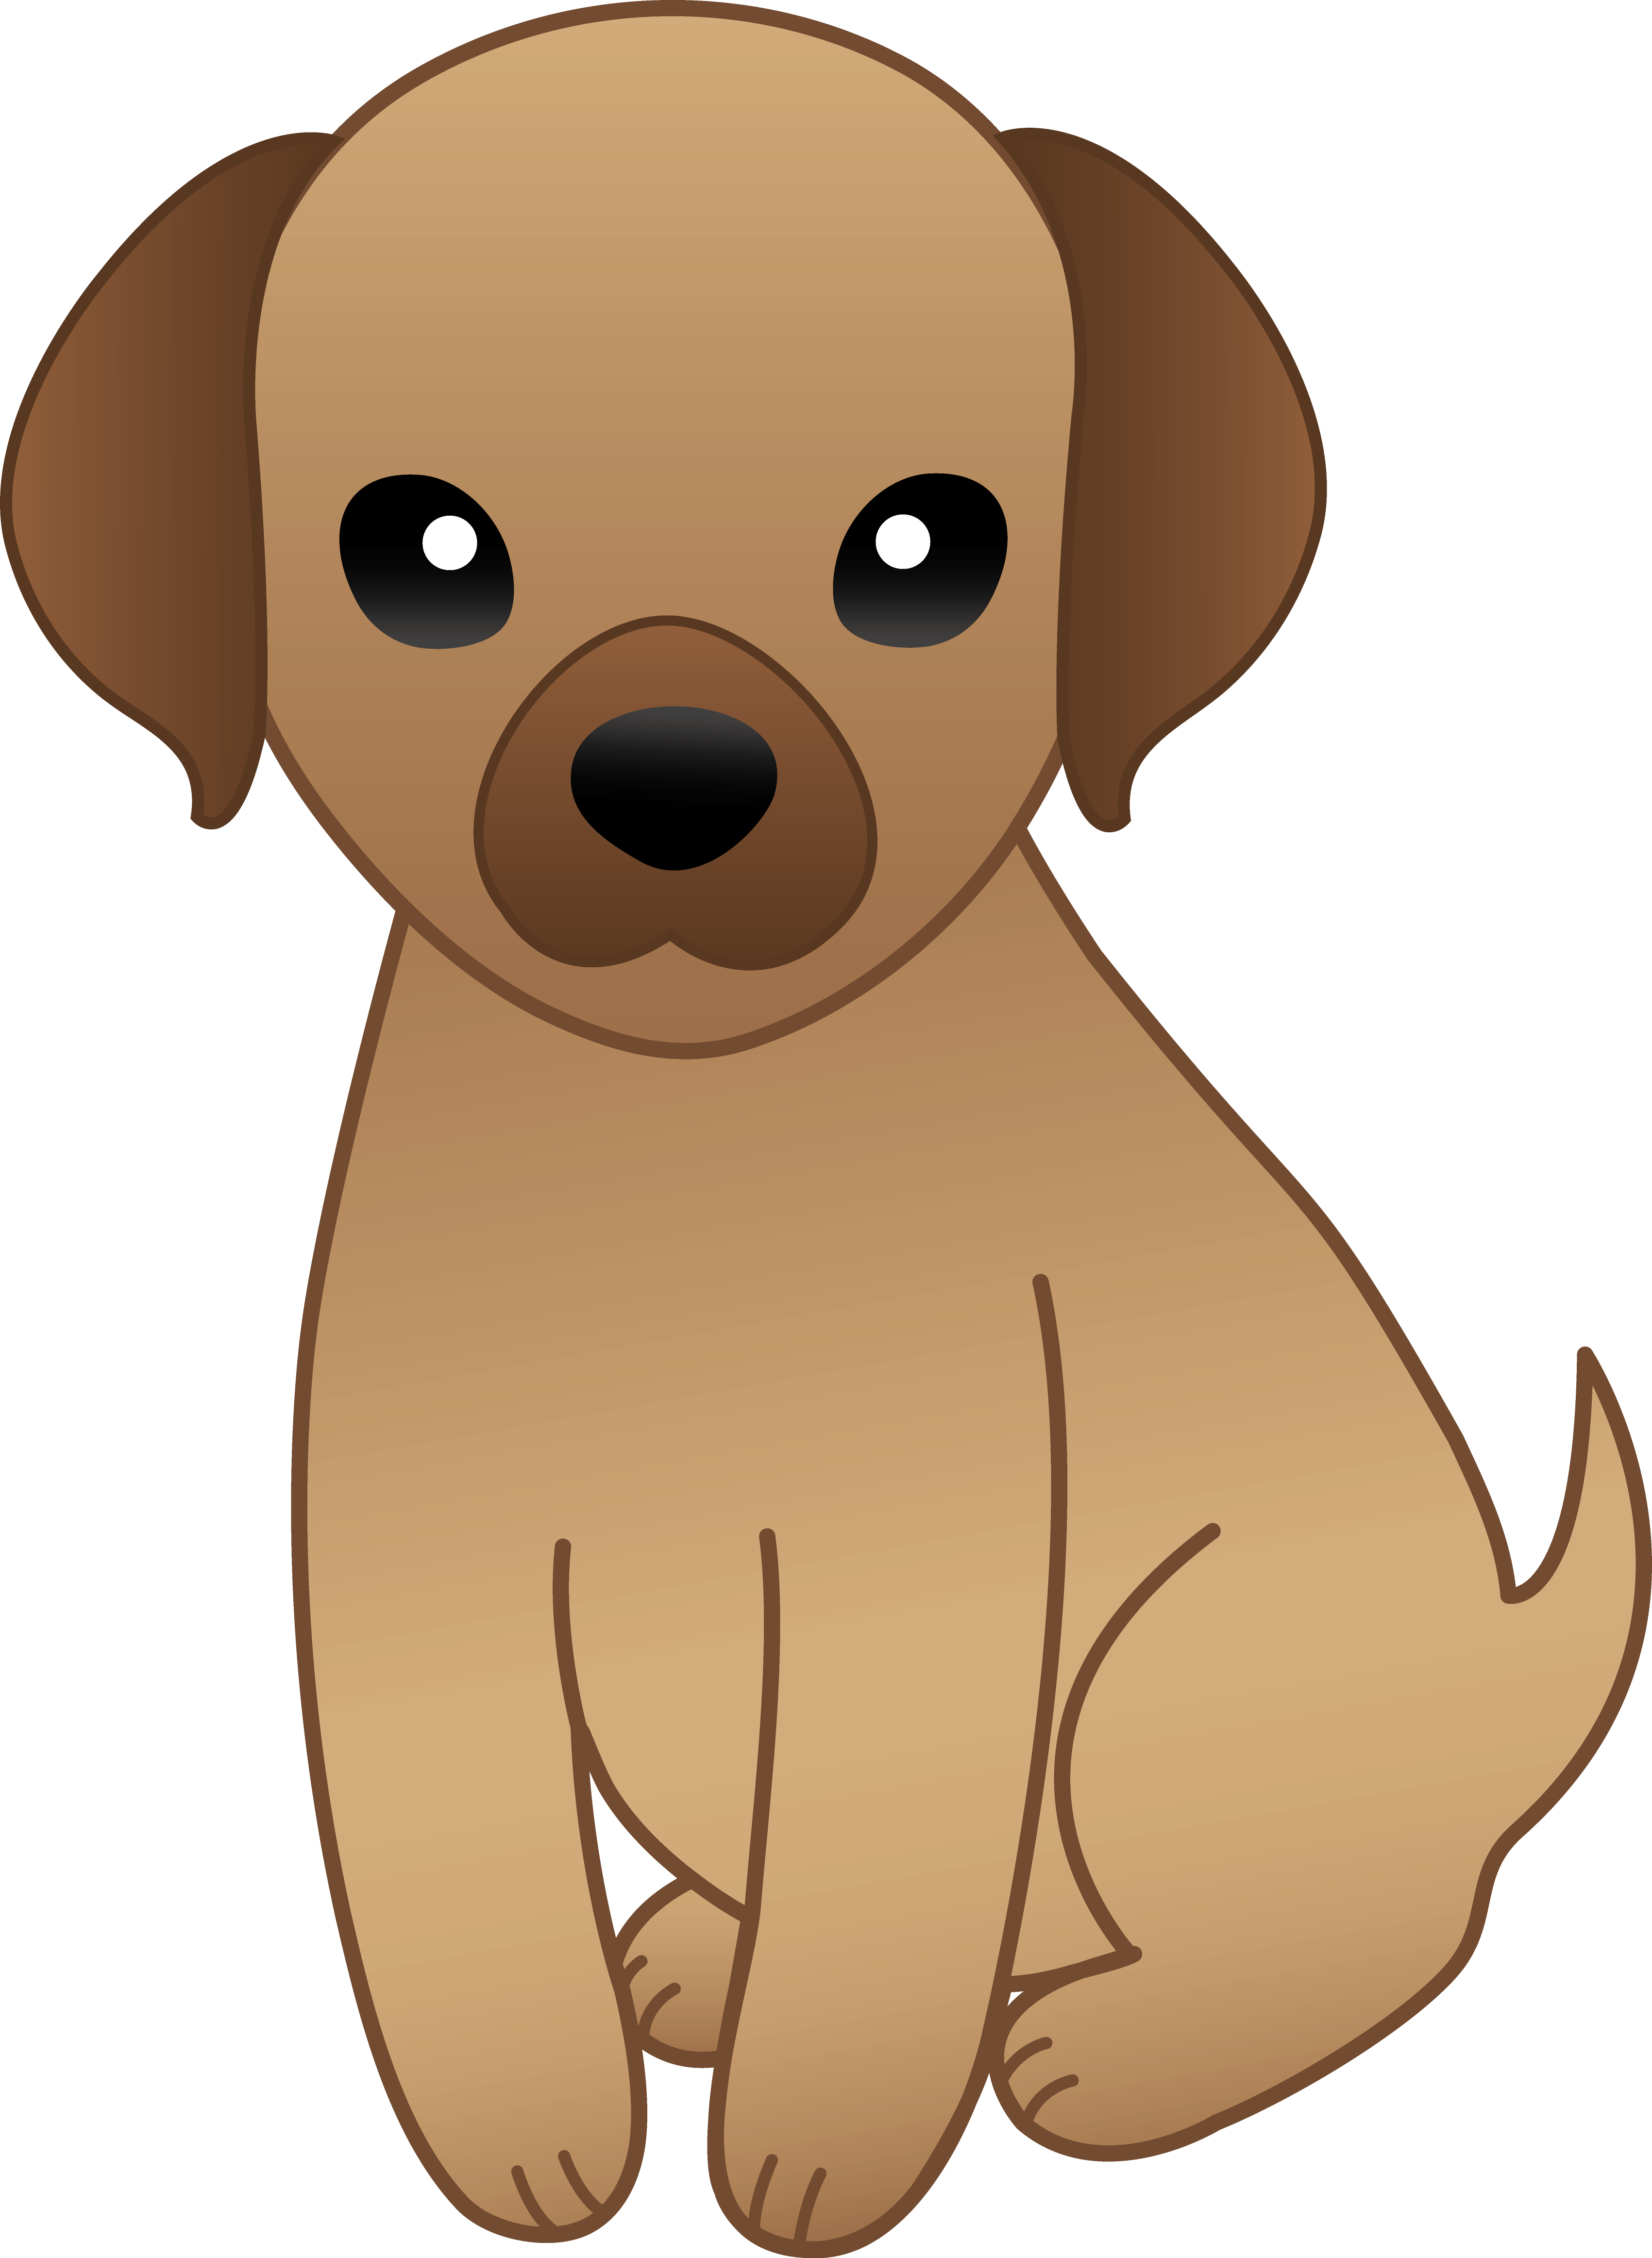 Cute Puppy Cartoon Wallpapers Wallpapers